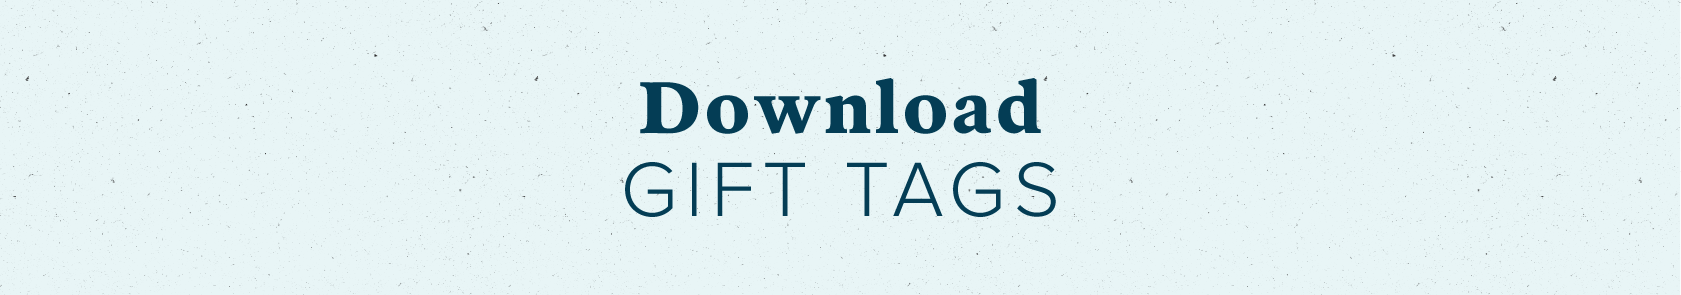 download-gift-tags